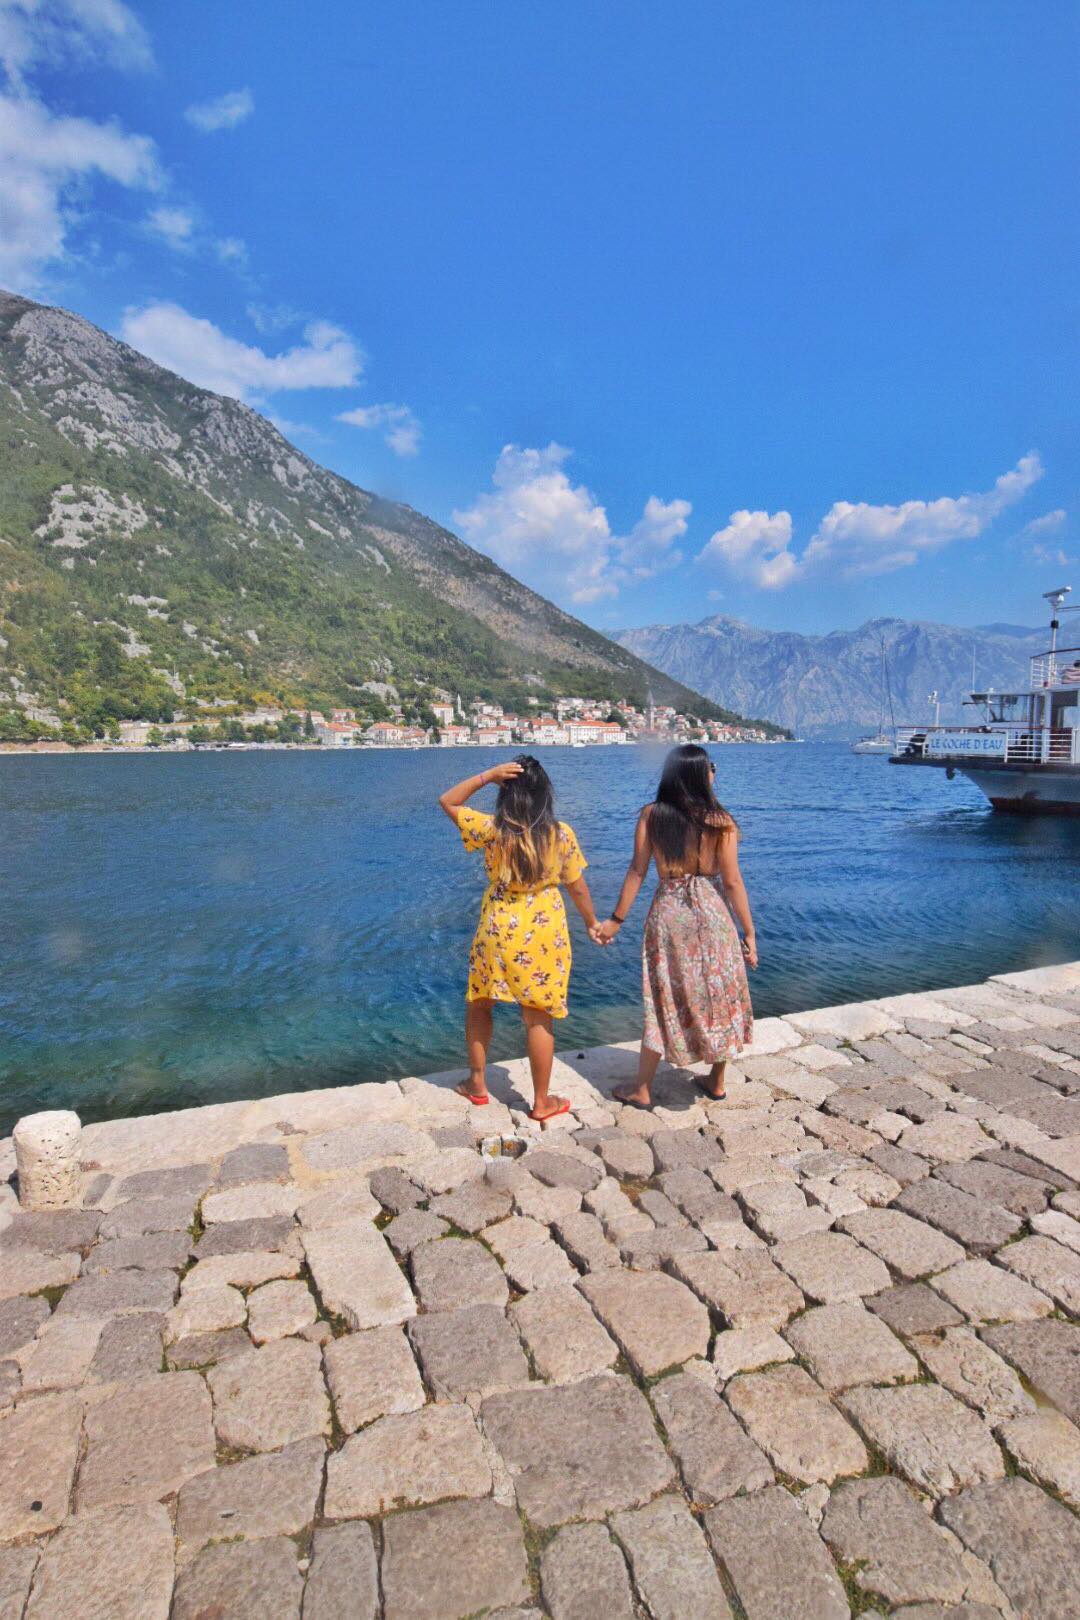 6 Days Herceg Novi Itinerary – What To See If You Have 6 Days in Montenegro During Summer Season